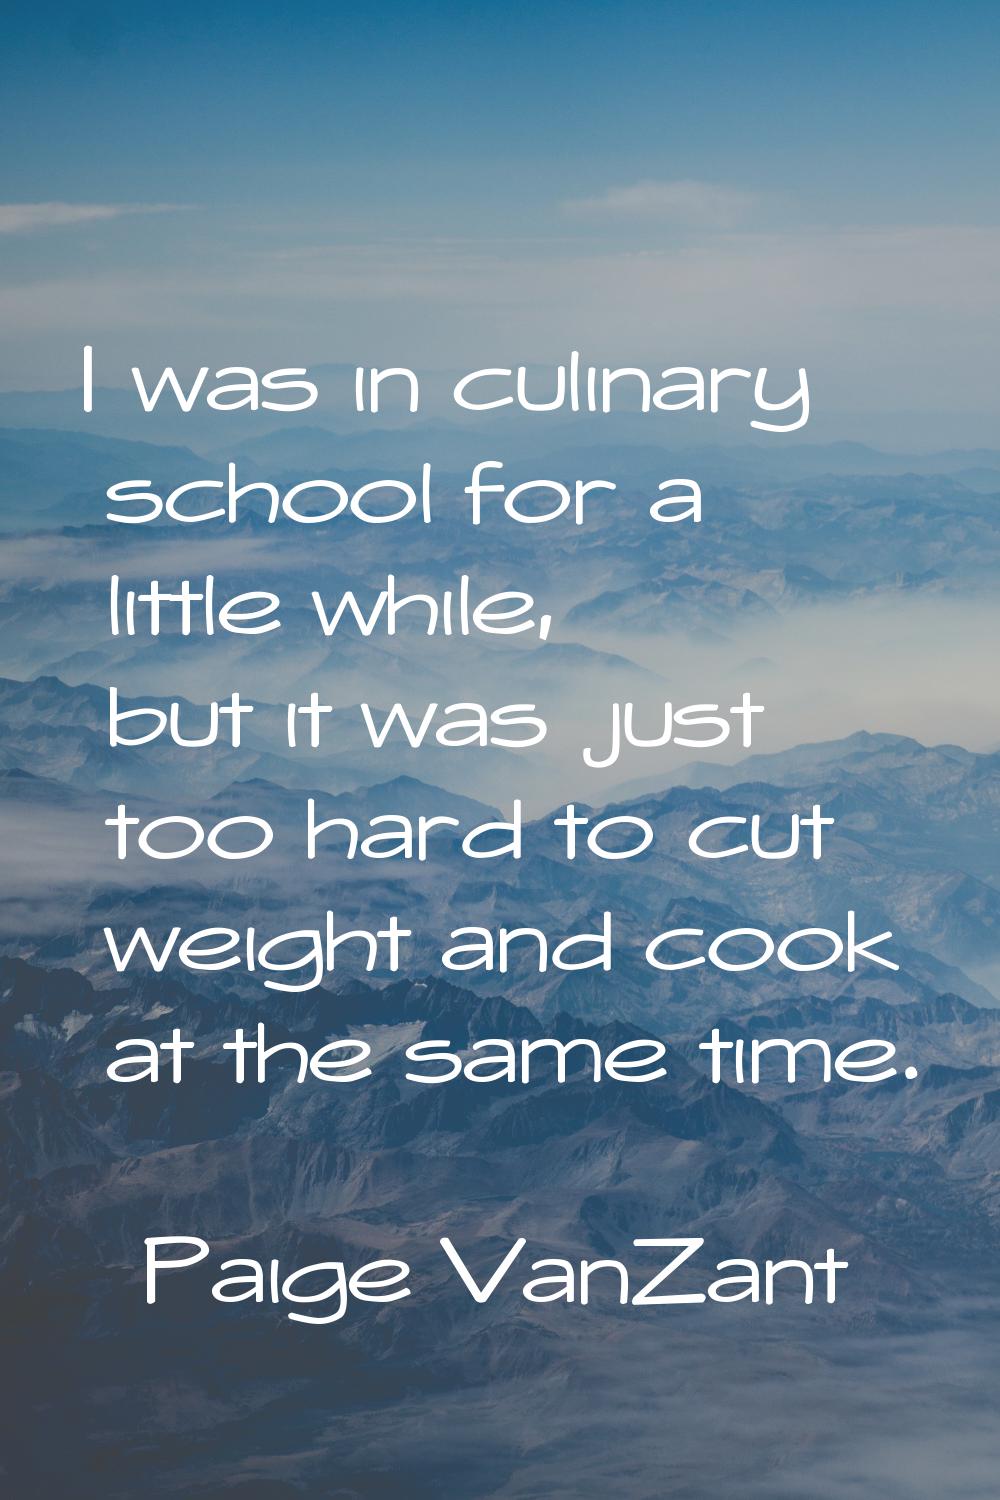 I was in culinary school for a little while, but it was just too hard to cut weight and cook at the